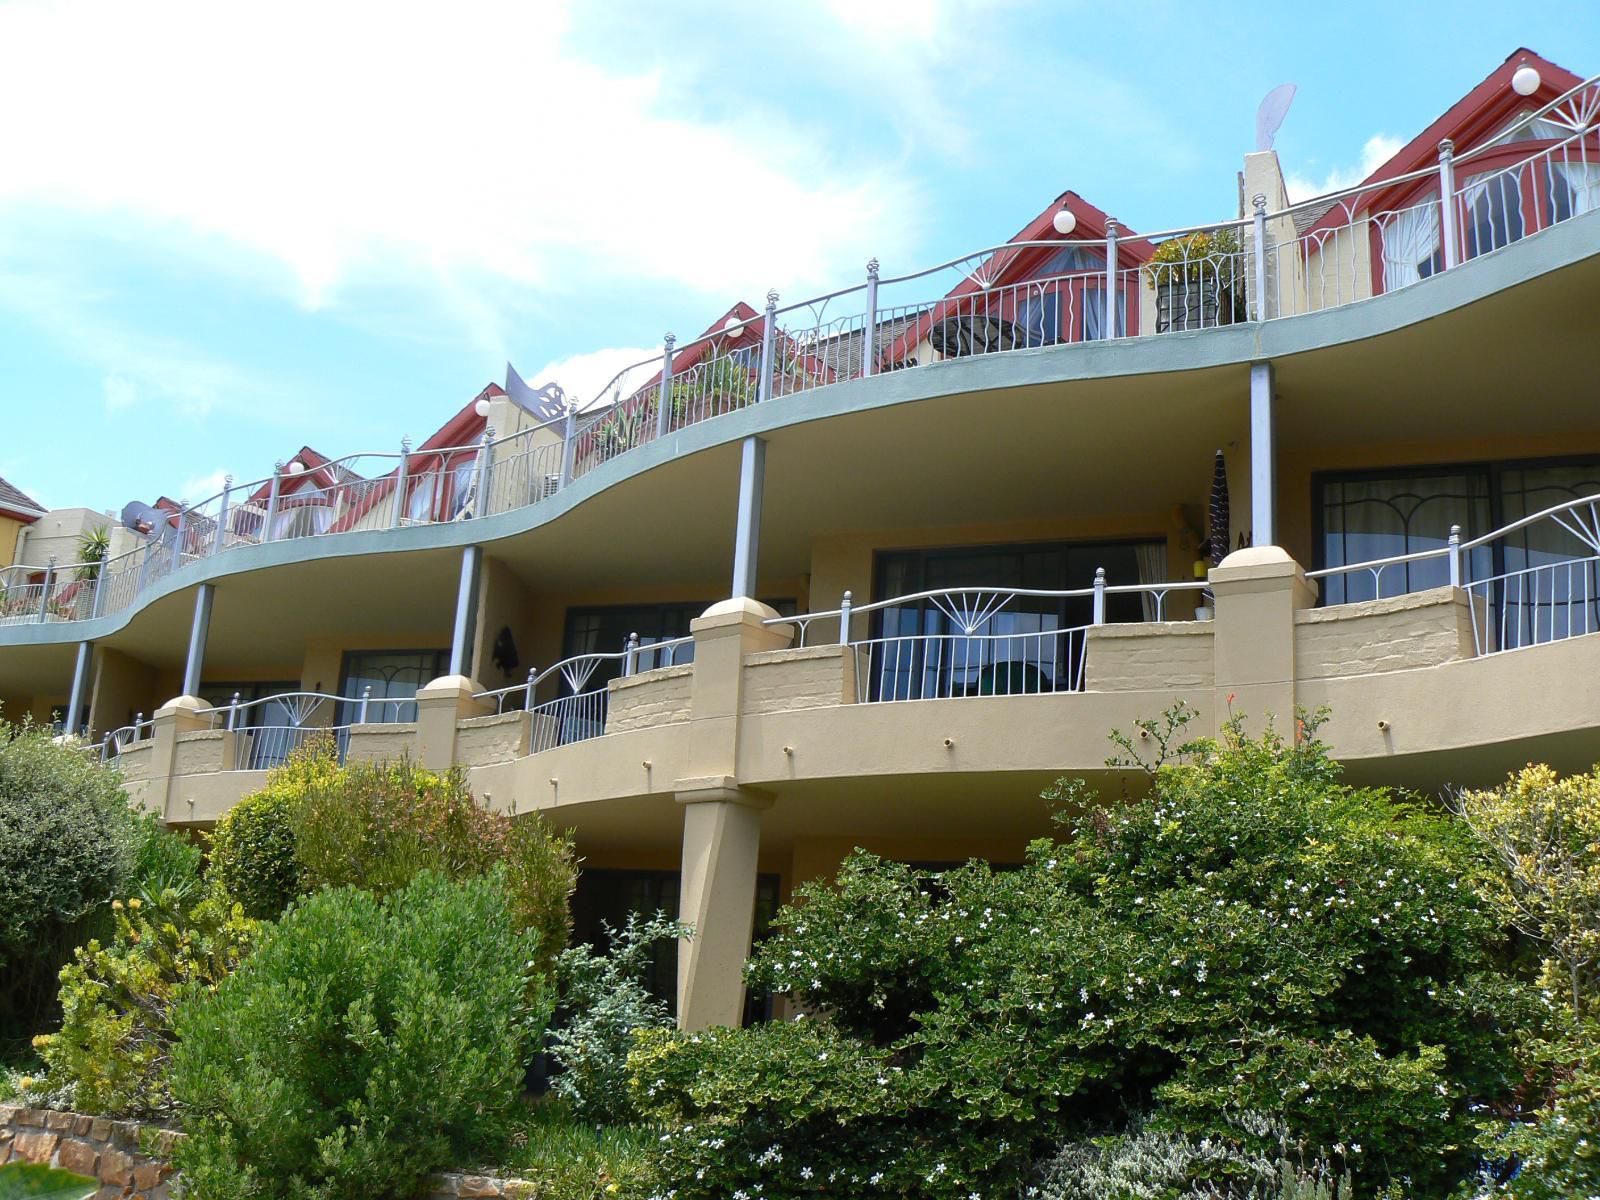 Village Self Catering Apartments Scott Estate Cape Town Western Cape South Africa Complementary Colors, Balcony, Architecture, House, Building